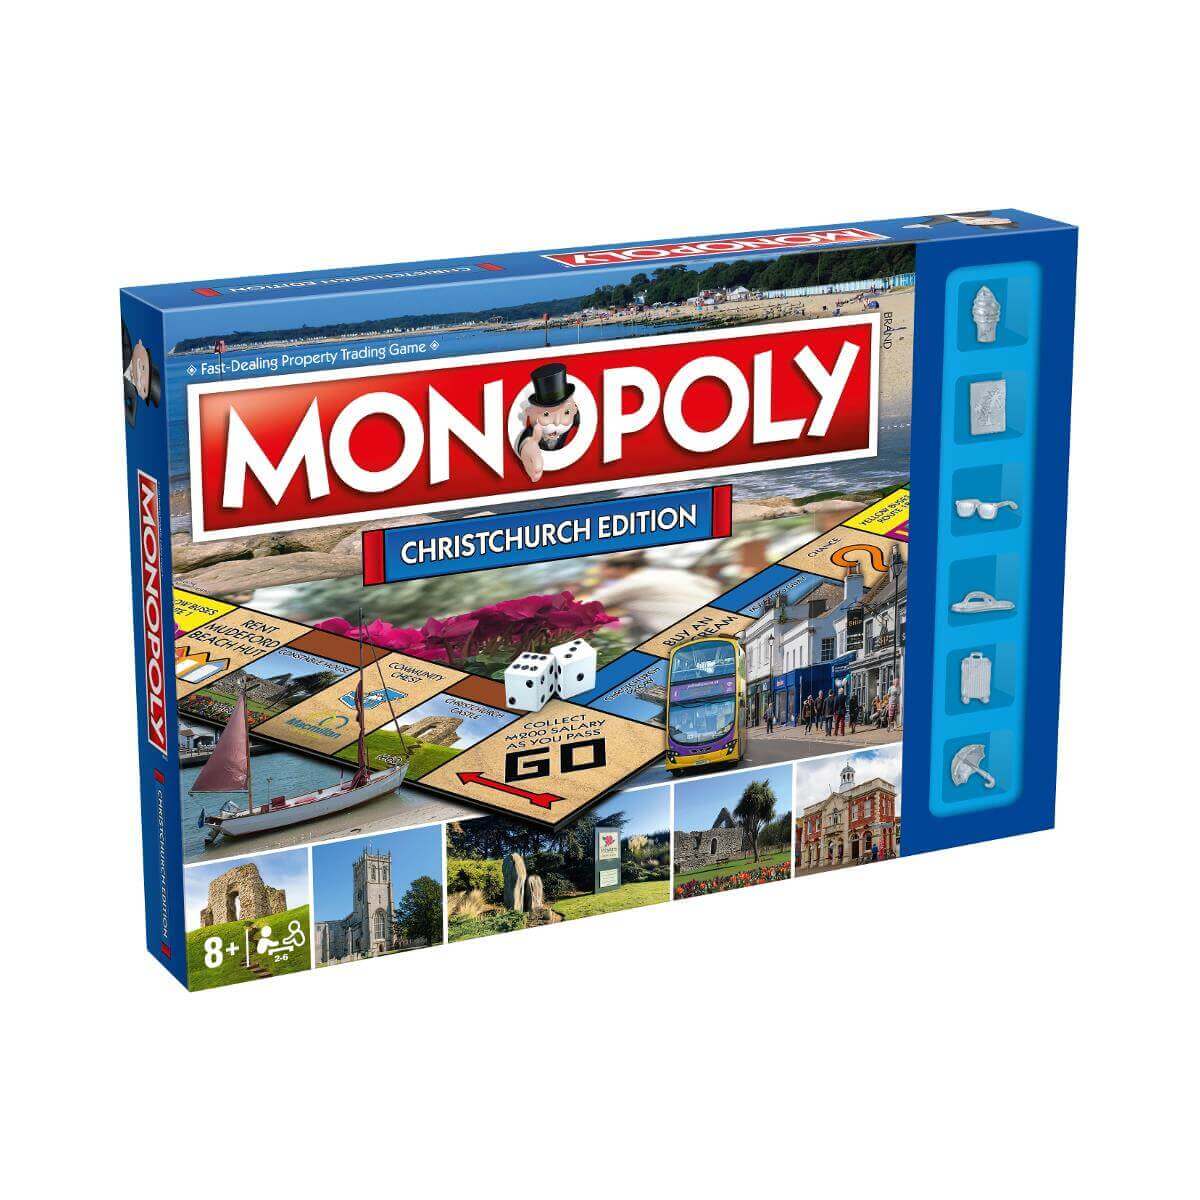 Christchurch Monopoly Board Game